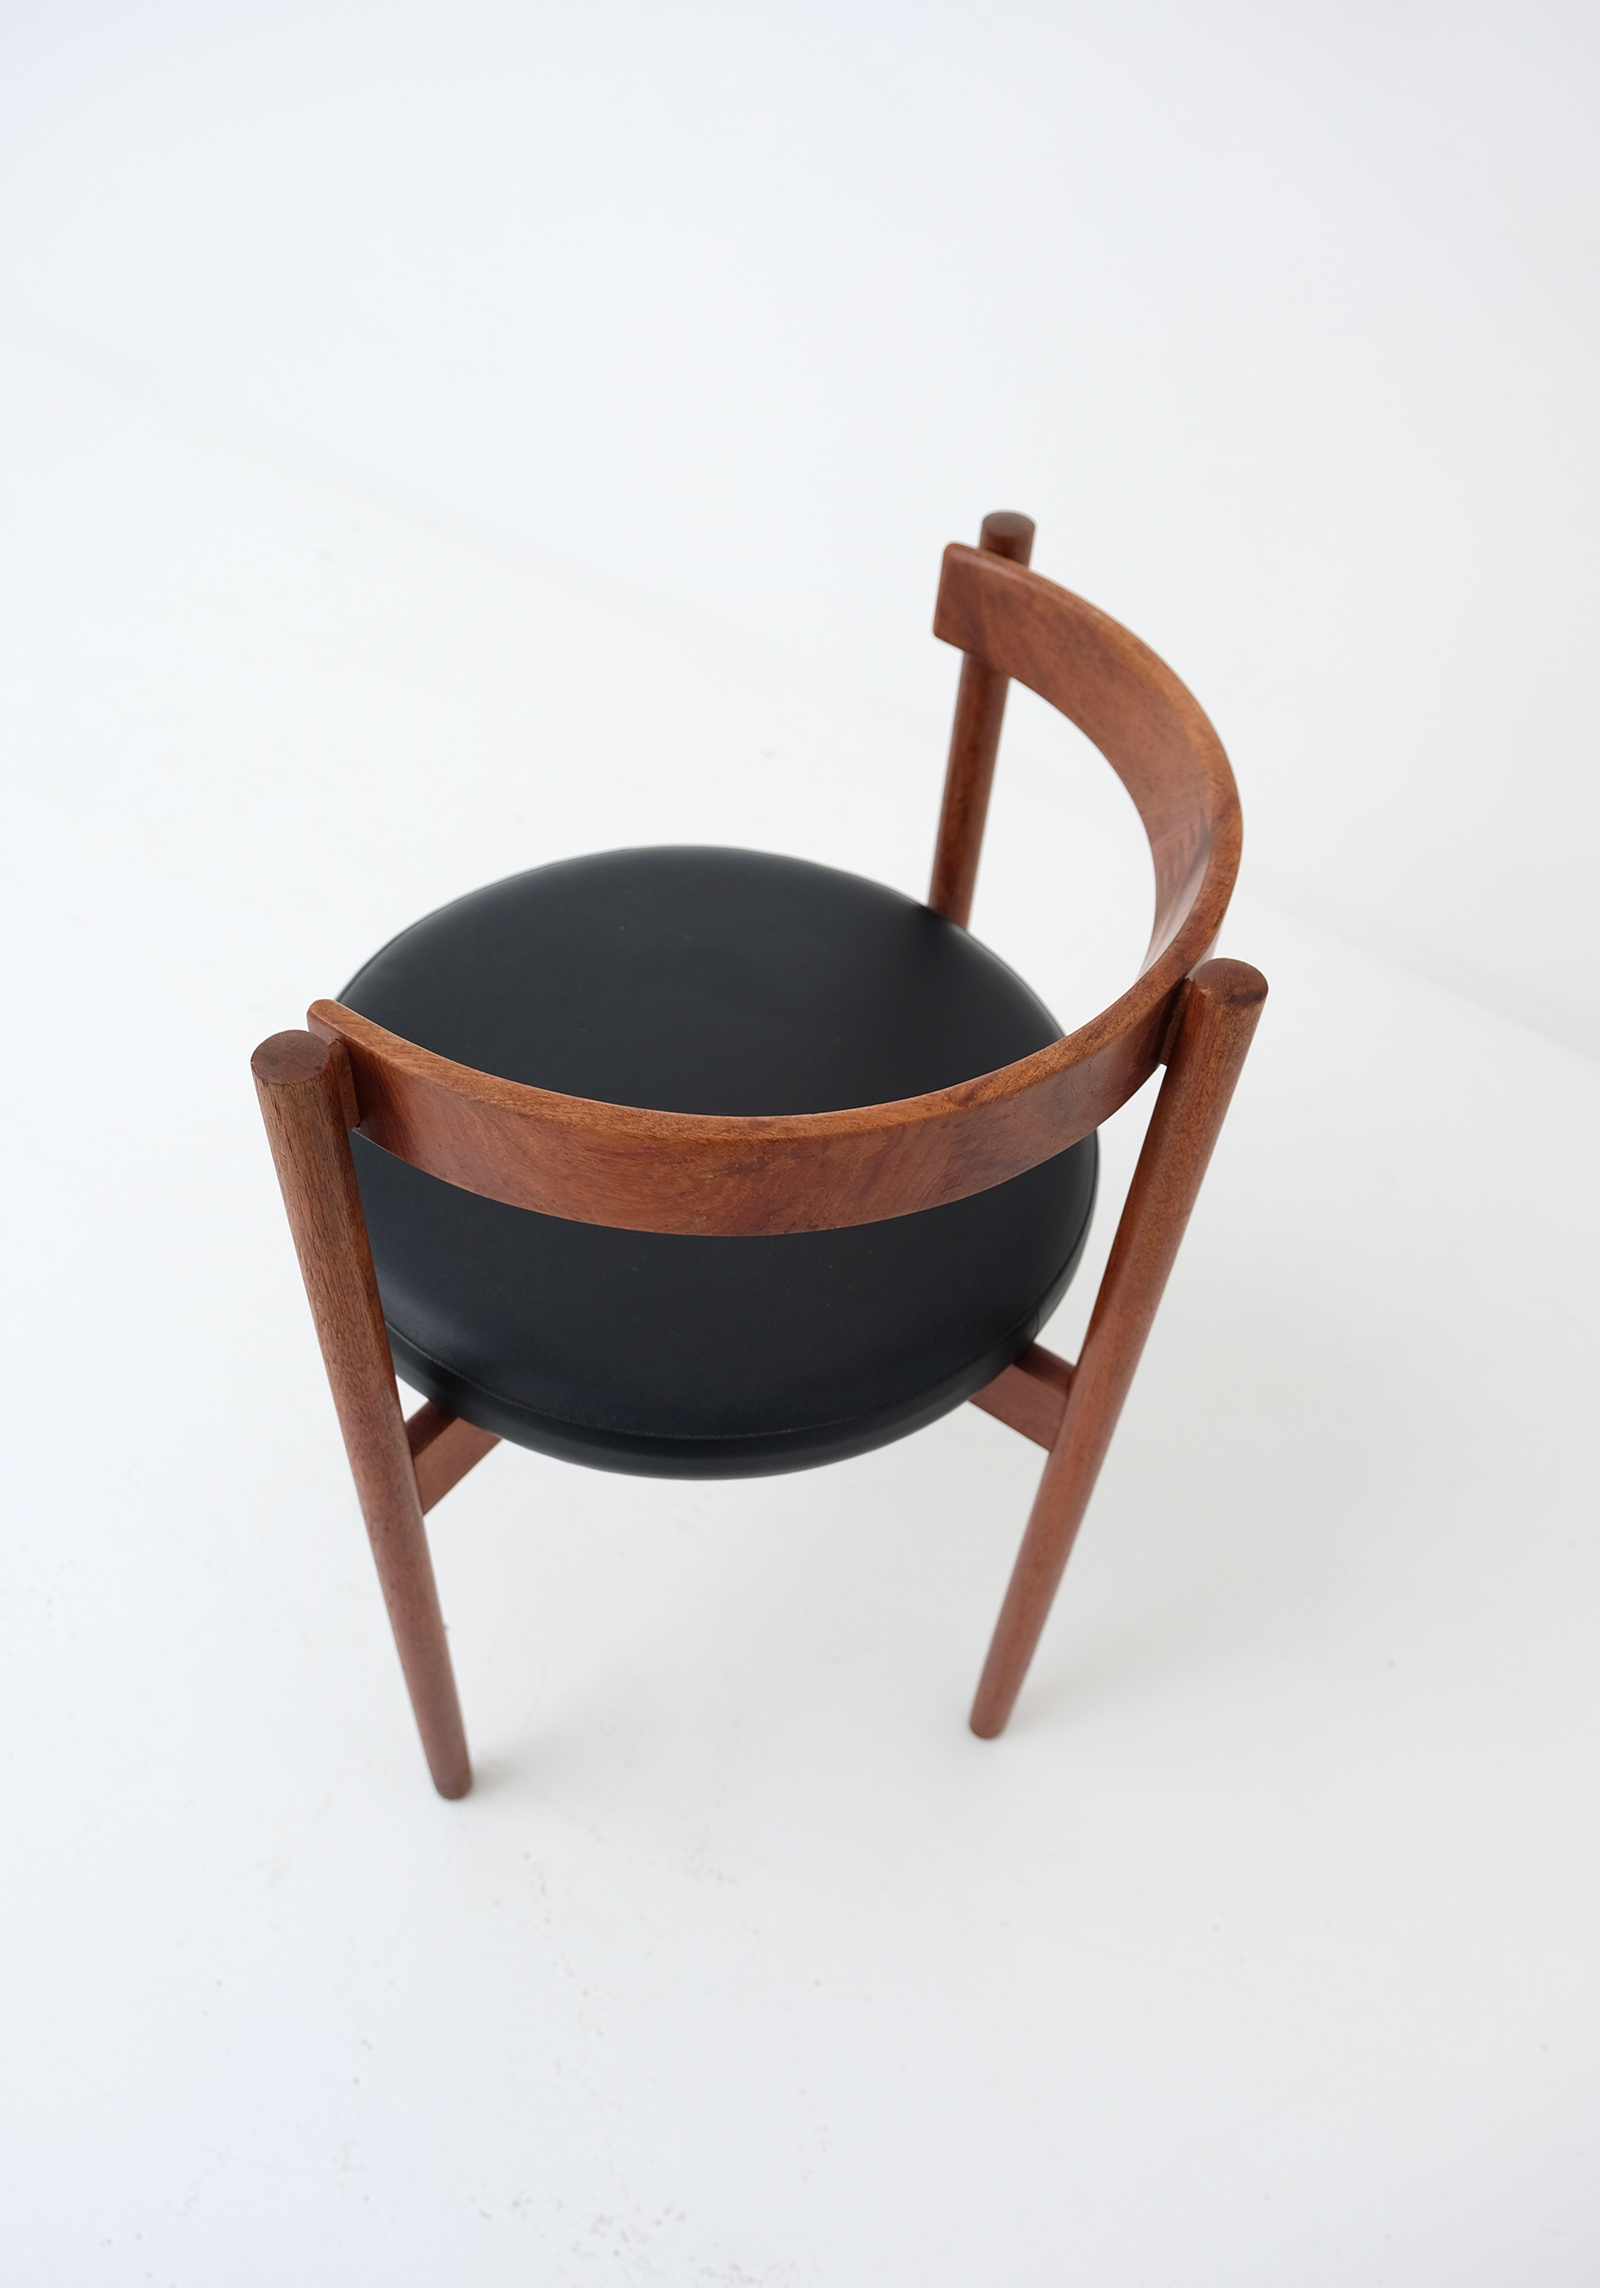 City Furniture | Hugo Frandsen Danish Rosewood And Leather Chair